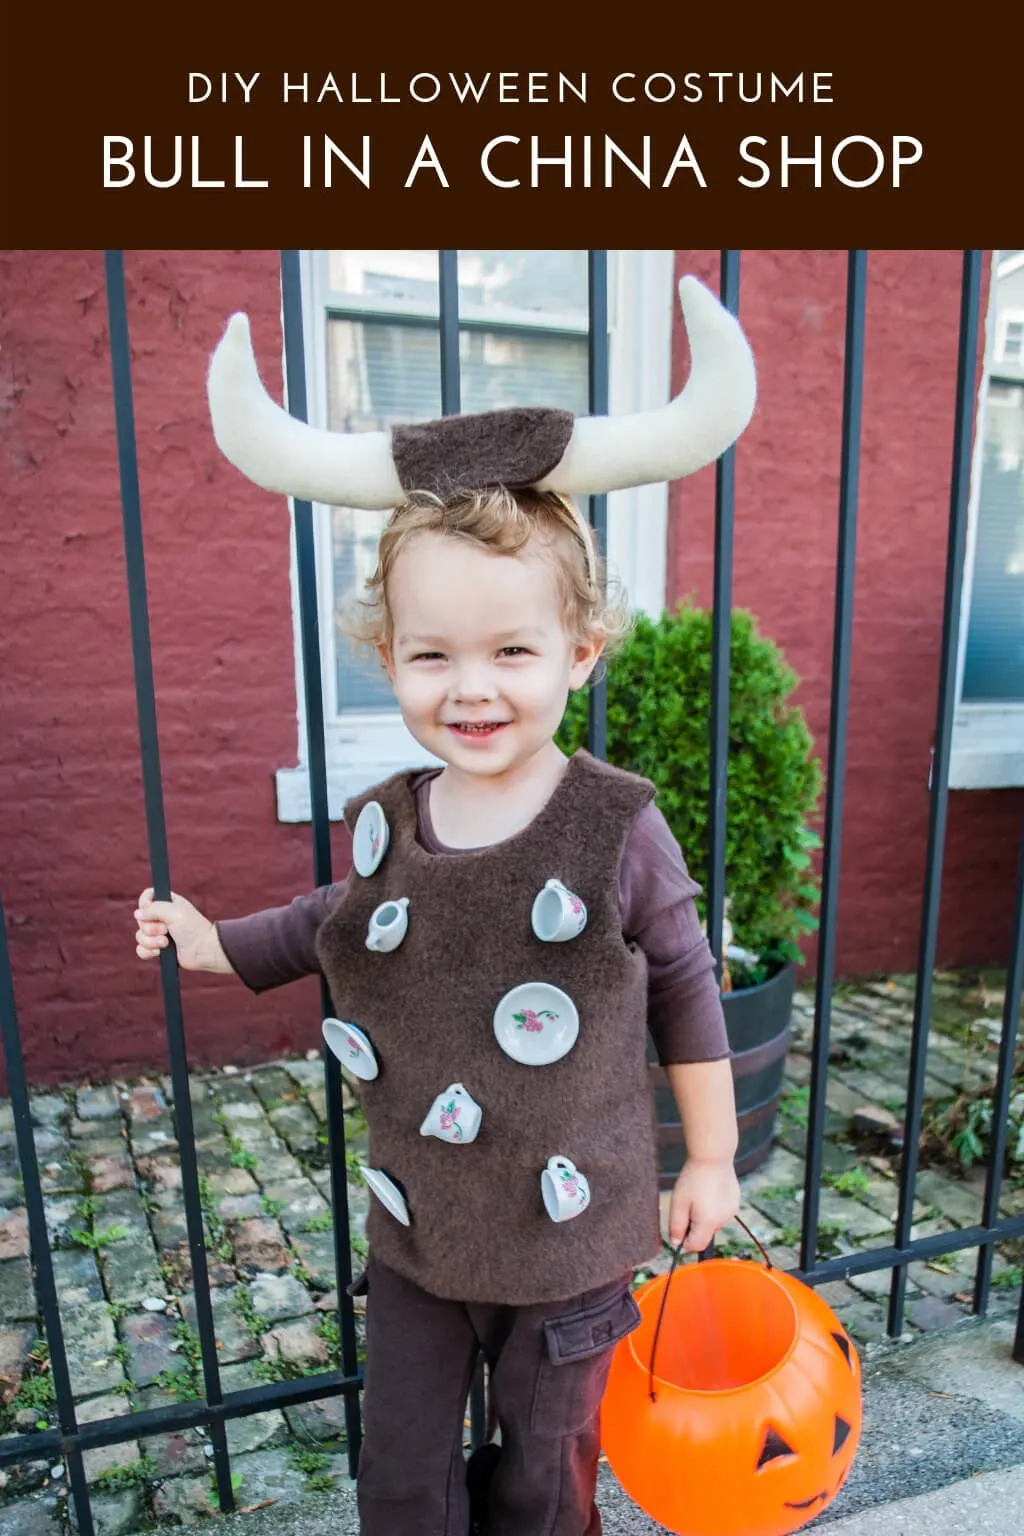 Funny Bull in a China Shop DIY Halloween Costume idea for toddlers and kids